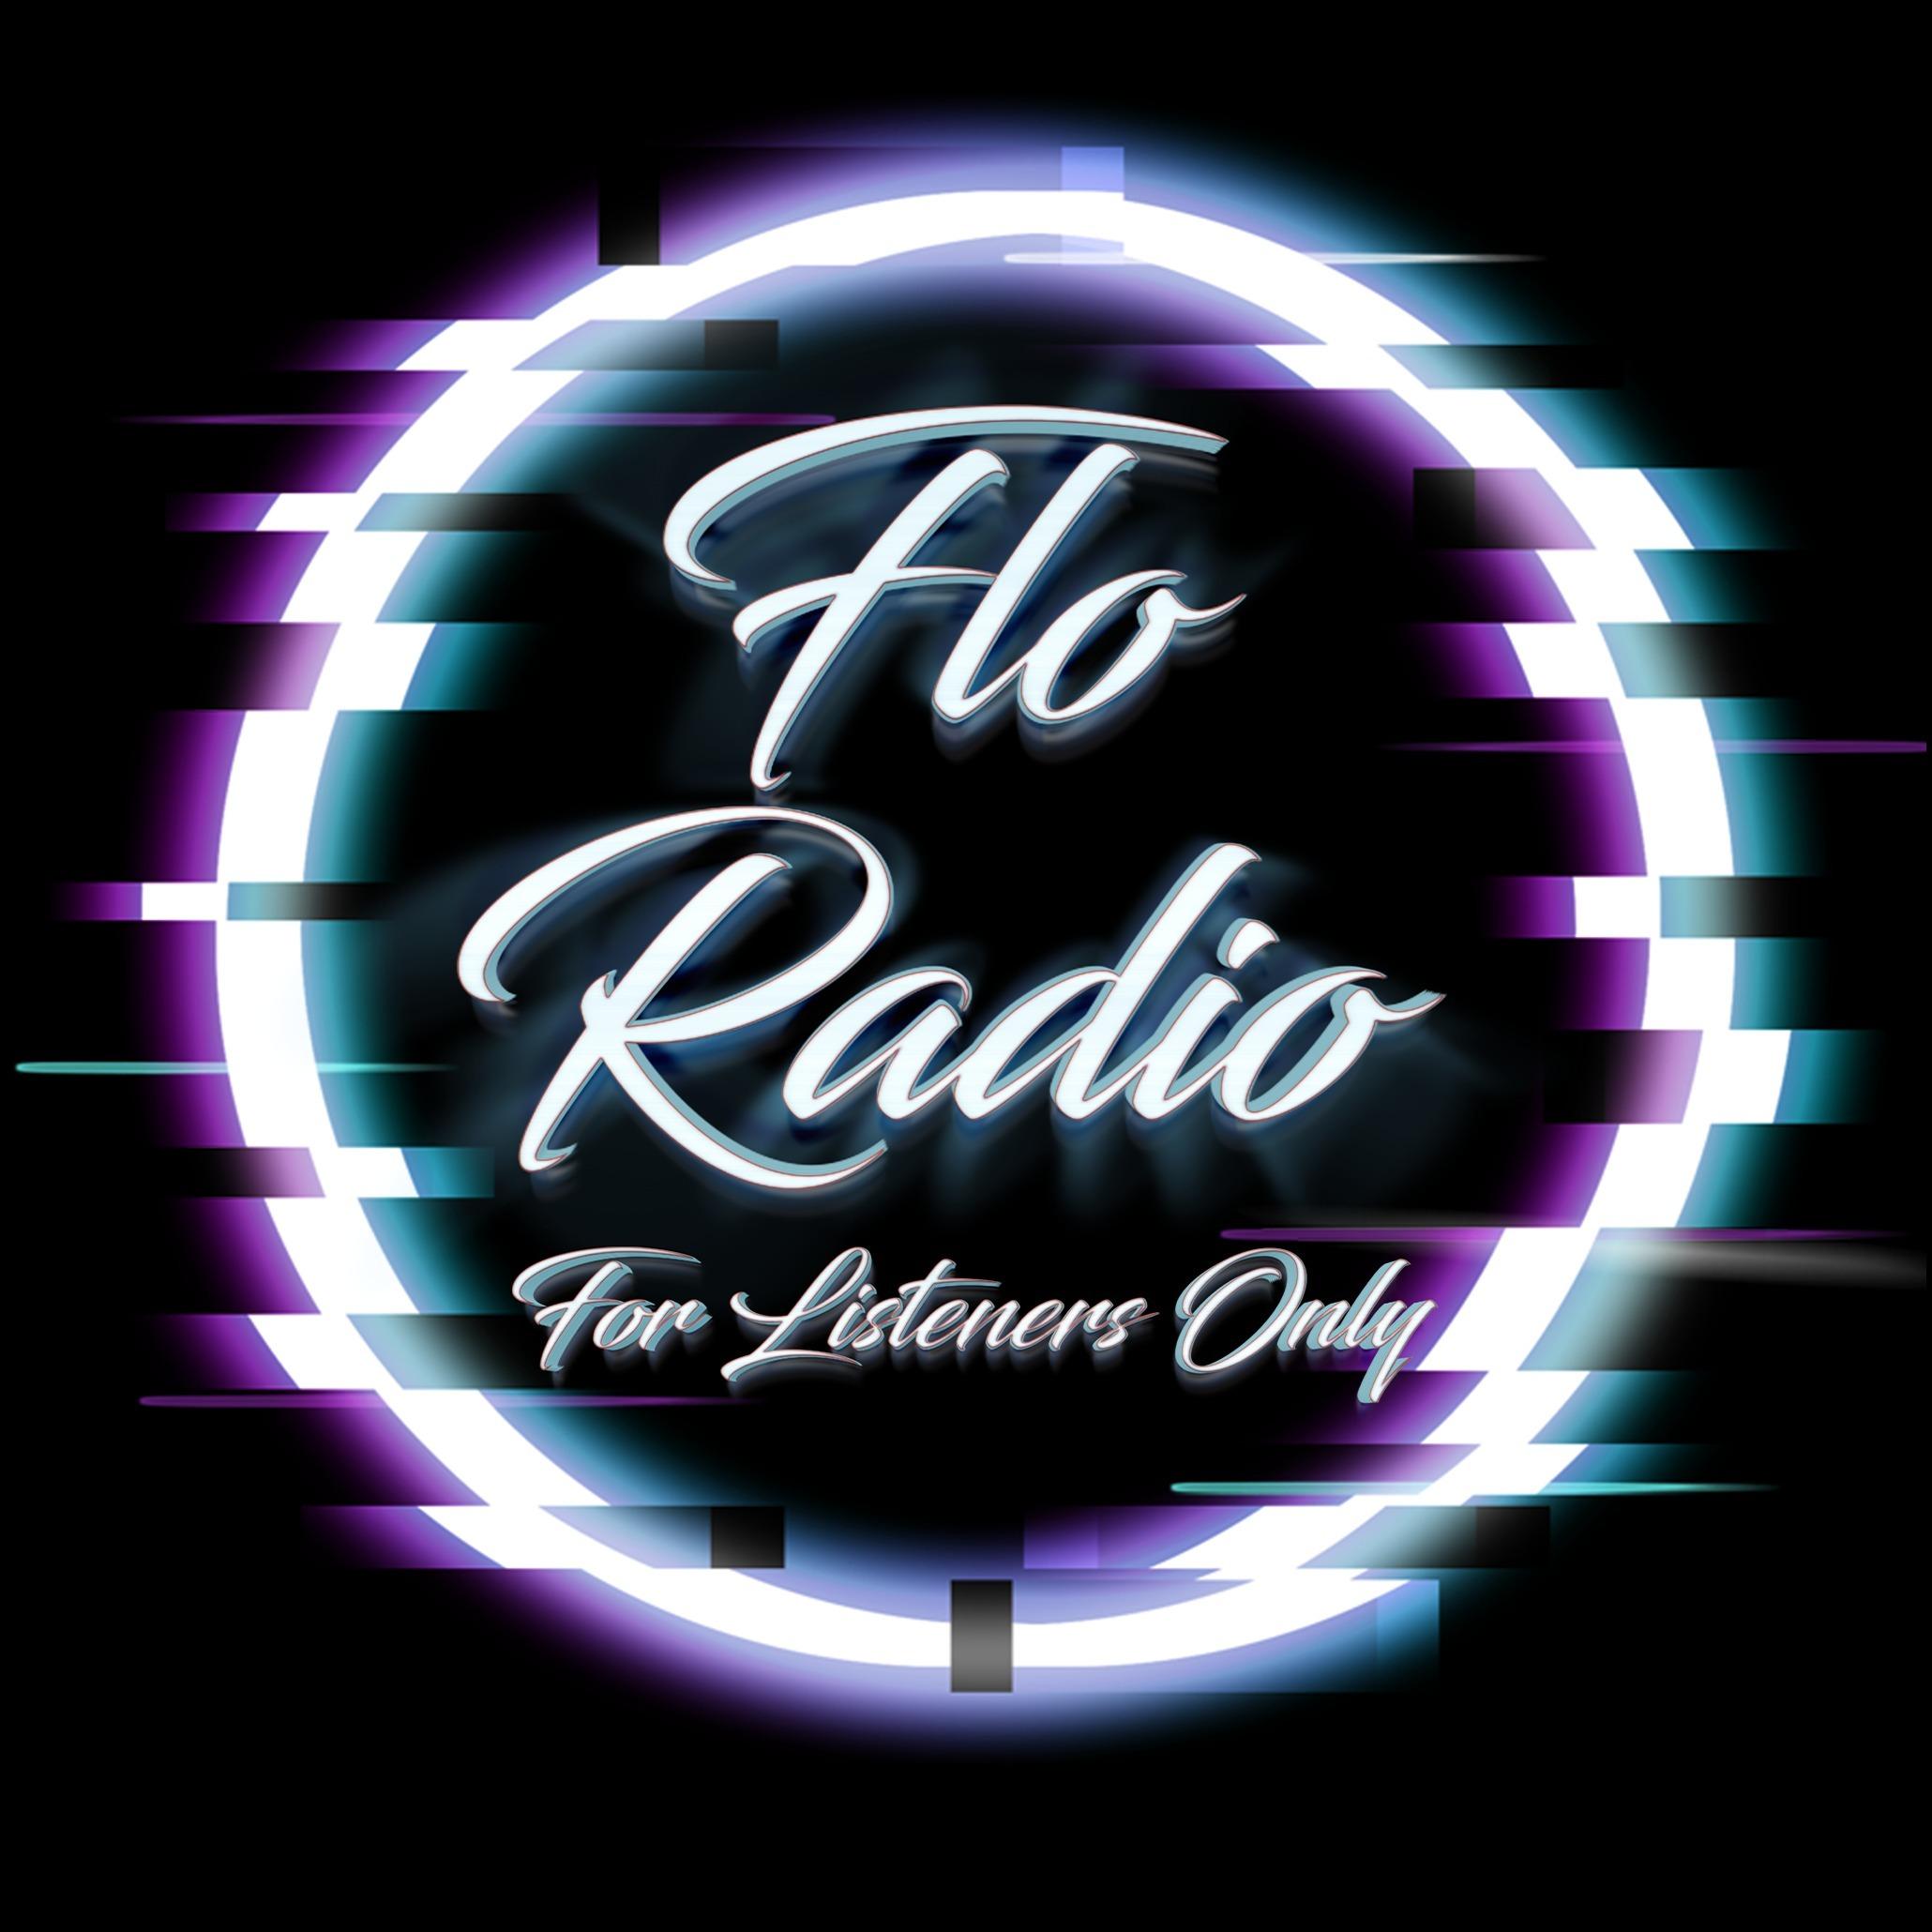 FLO RADIO - For Listeners Only